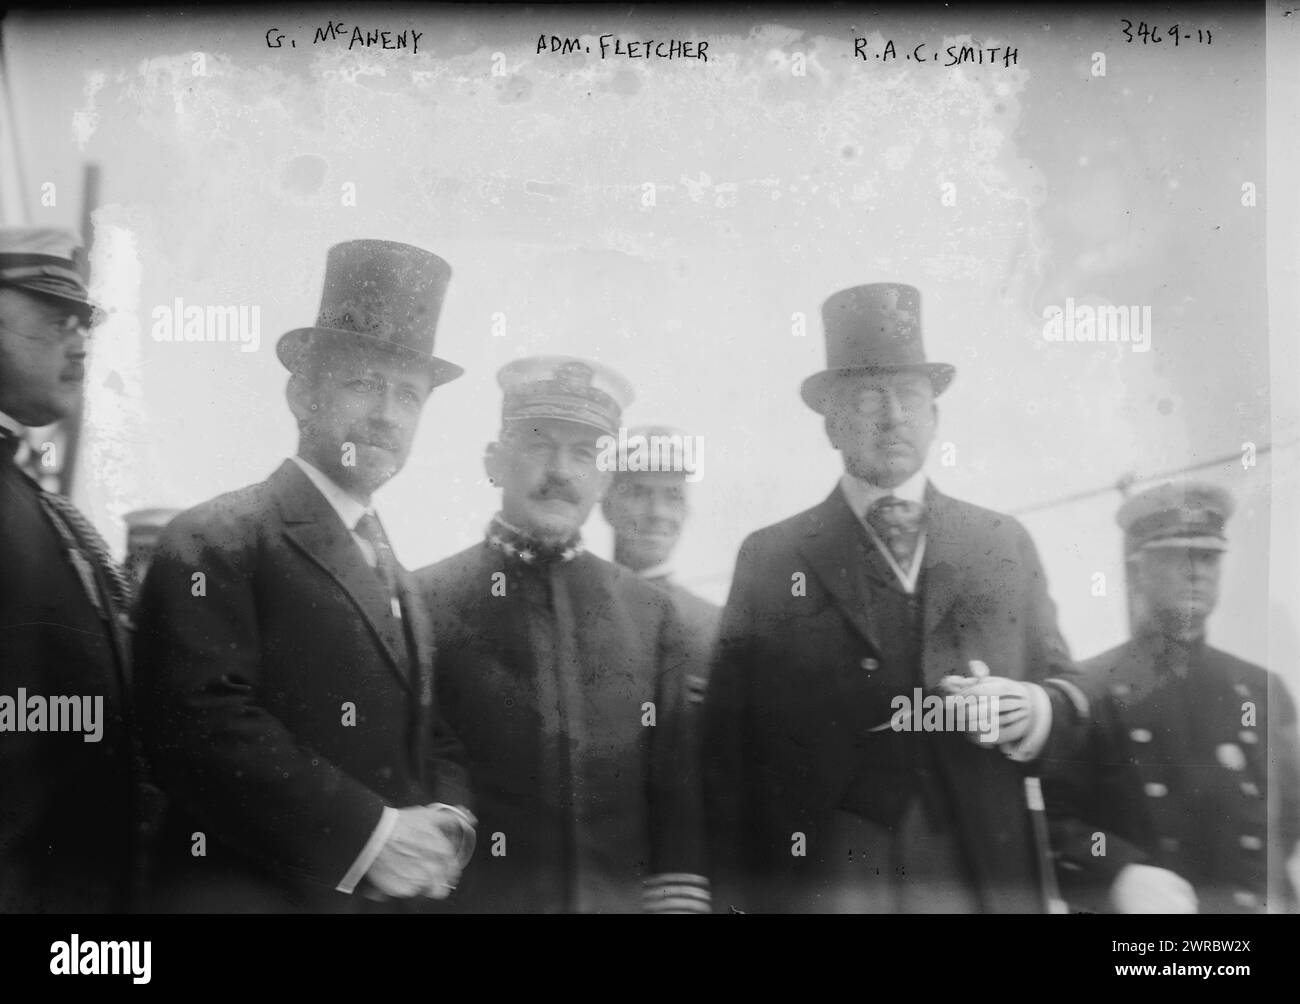 G. McAneny, Adm. Fletcher, R.A.C. Smith, Photograph shows U.S. Navy Admiral Frank Friday Fletcher (1855-1928), Commander of the Atlantic fleet; Robert A.C. Smith (1857-1933), Commissioner of Docks in New York City and Acting Mayor of New York George Francis McAneny (1869-1953). The men were probably gathered on the USS Wyoming for the Naval review of May, 1915., 1915 May, Glass negatives, 1 negative: glass Stock Photo